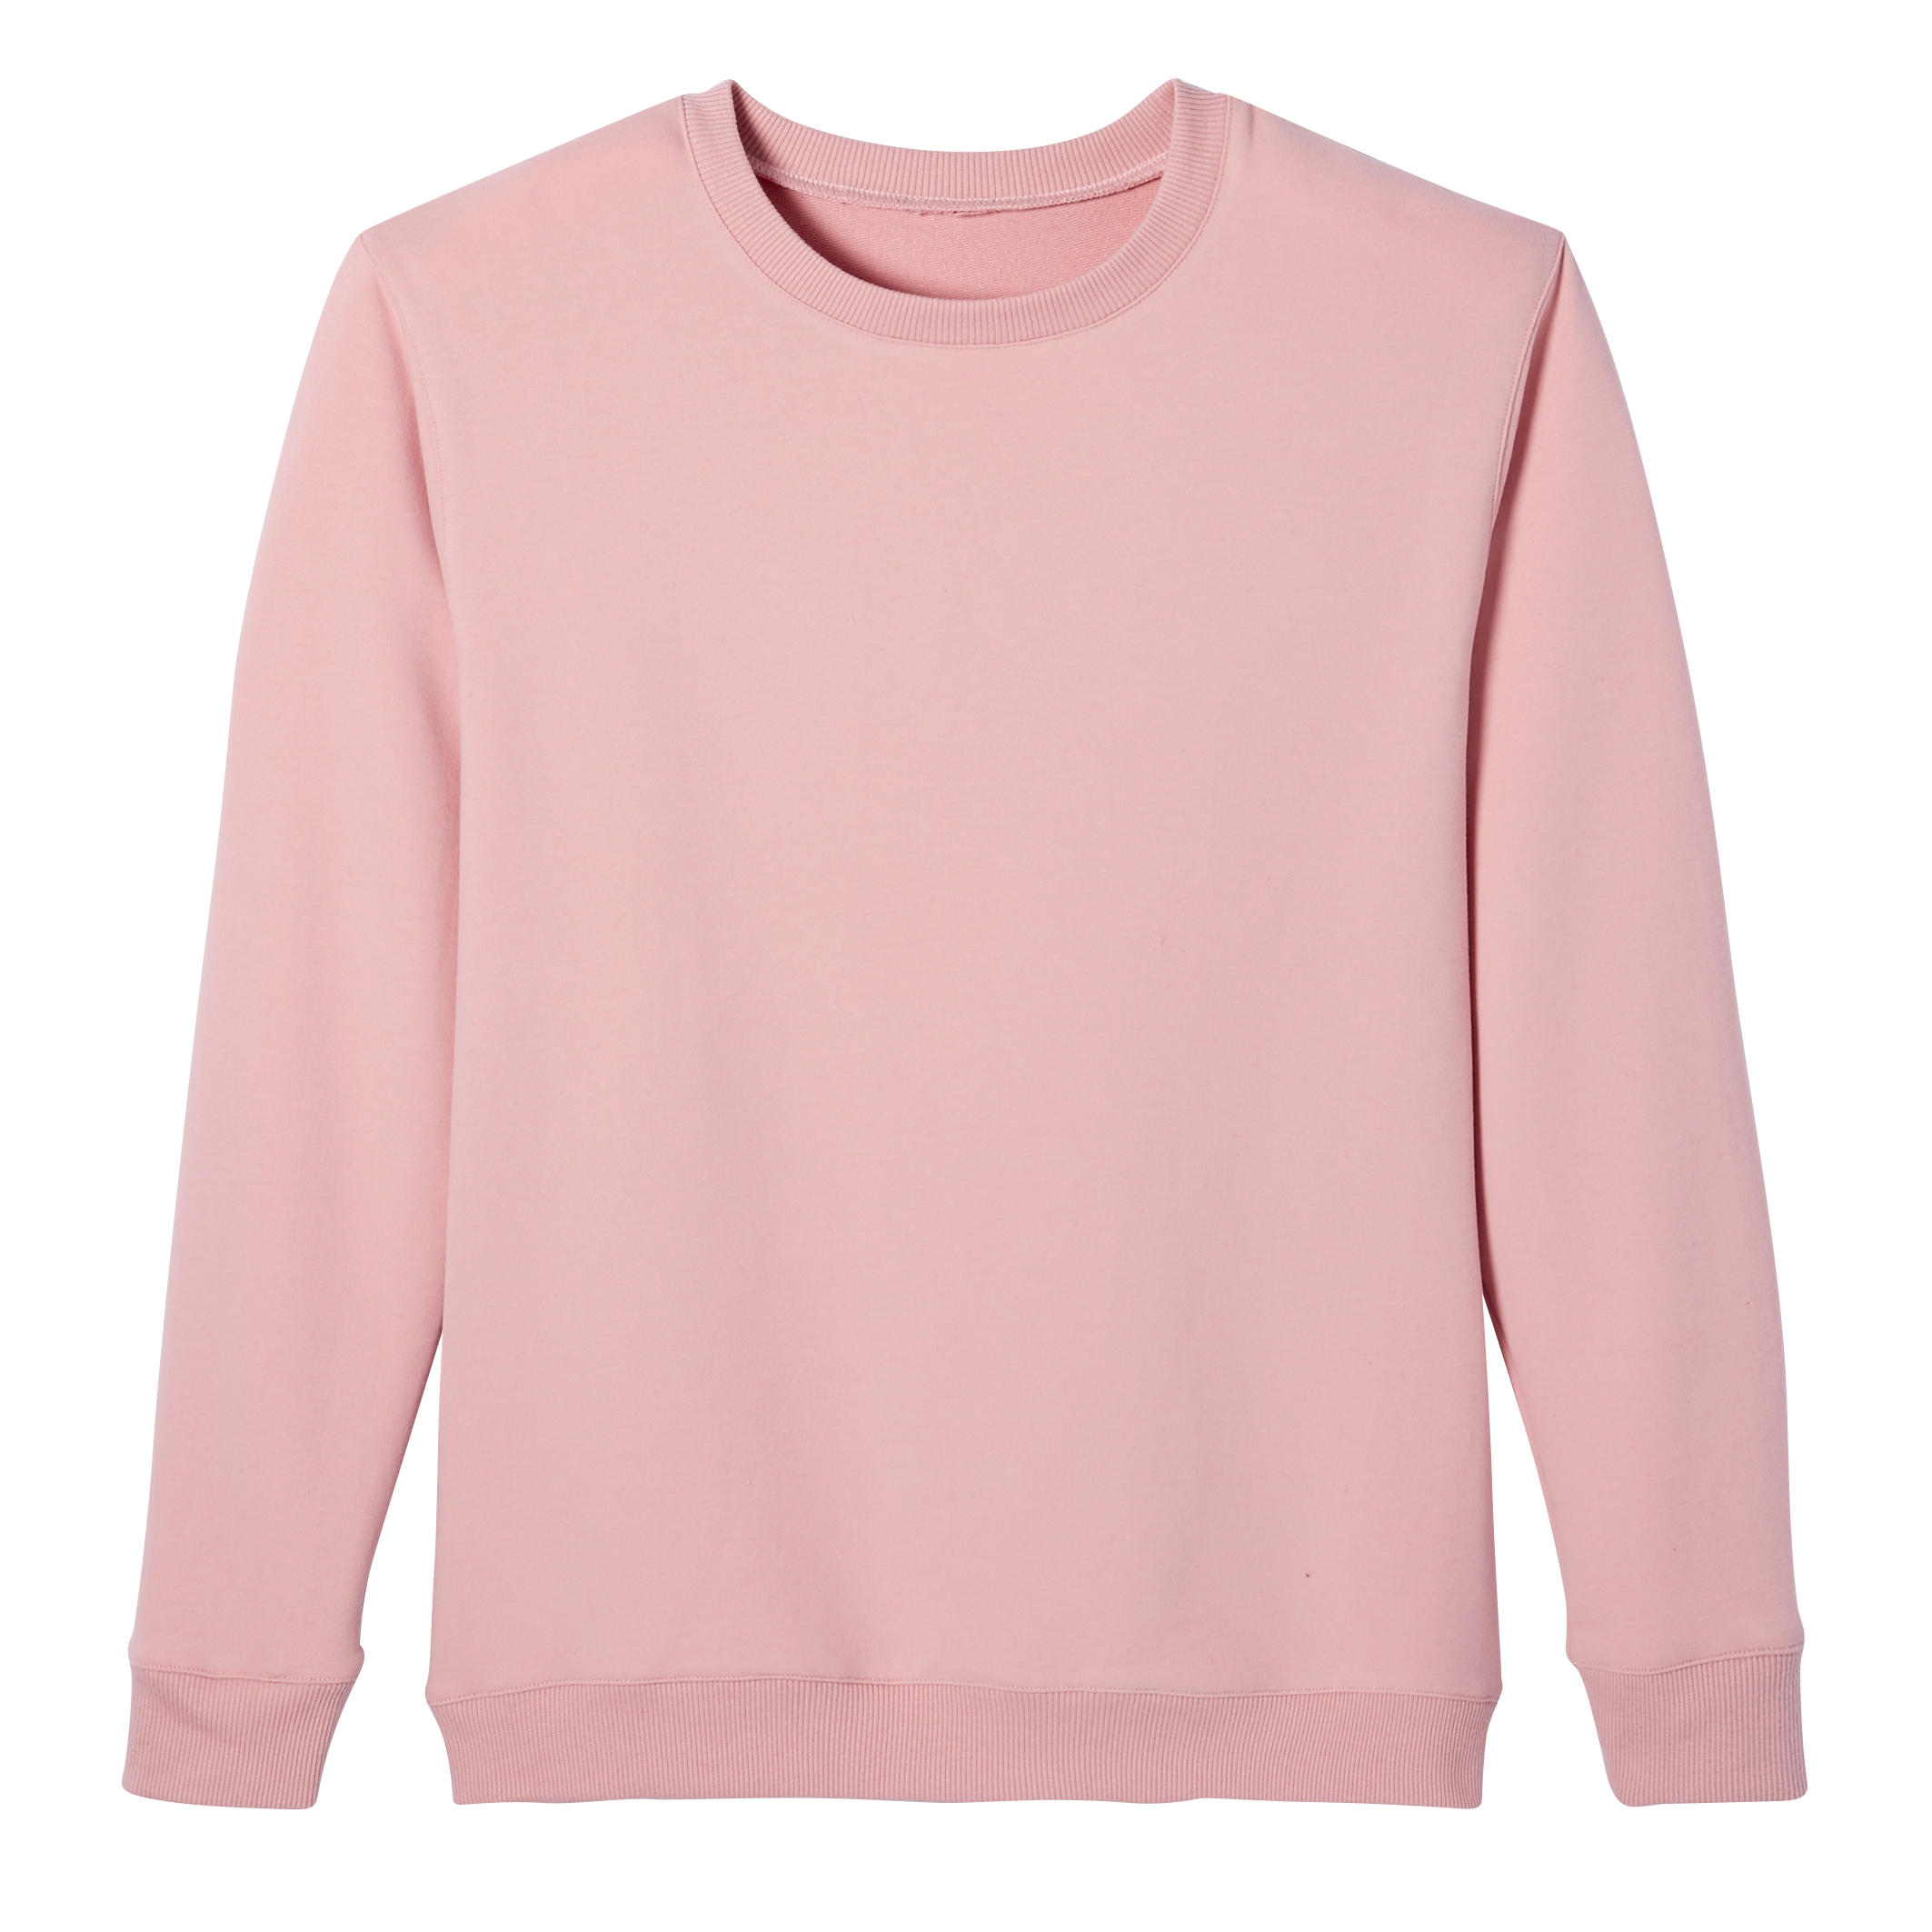 100% Nature Cotton French Terry Sweatshirt by Calida